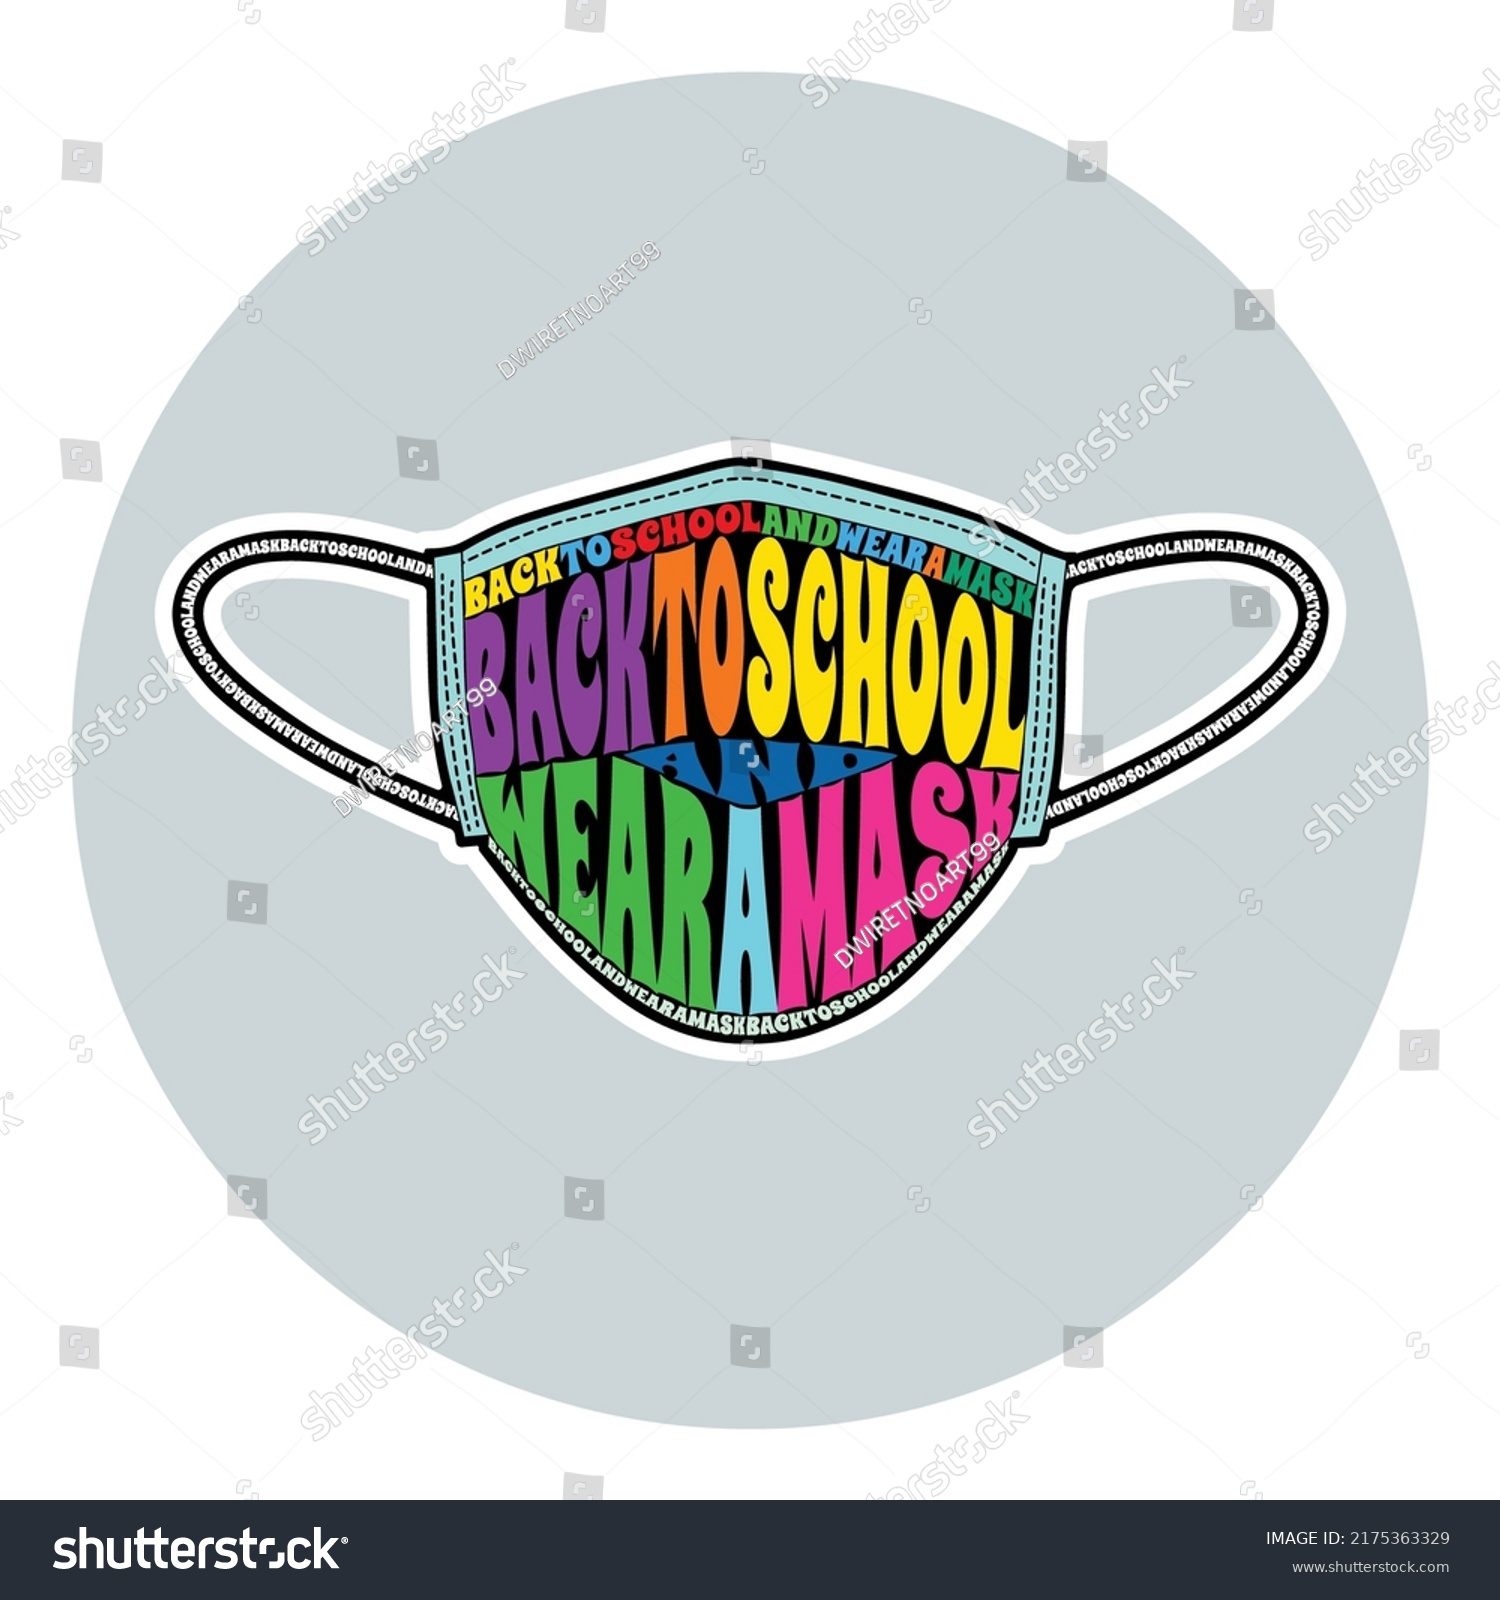 SVG of Back To School and Wear a Mask, Text Warp Art in Form of Face Mask Colorful Vector Svg illustration. svg